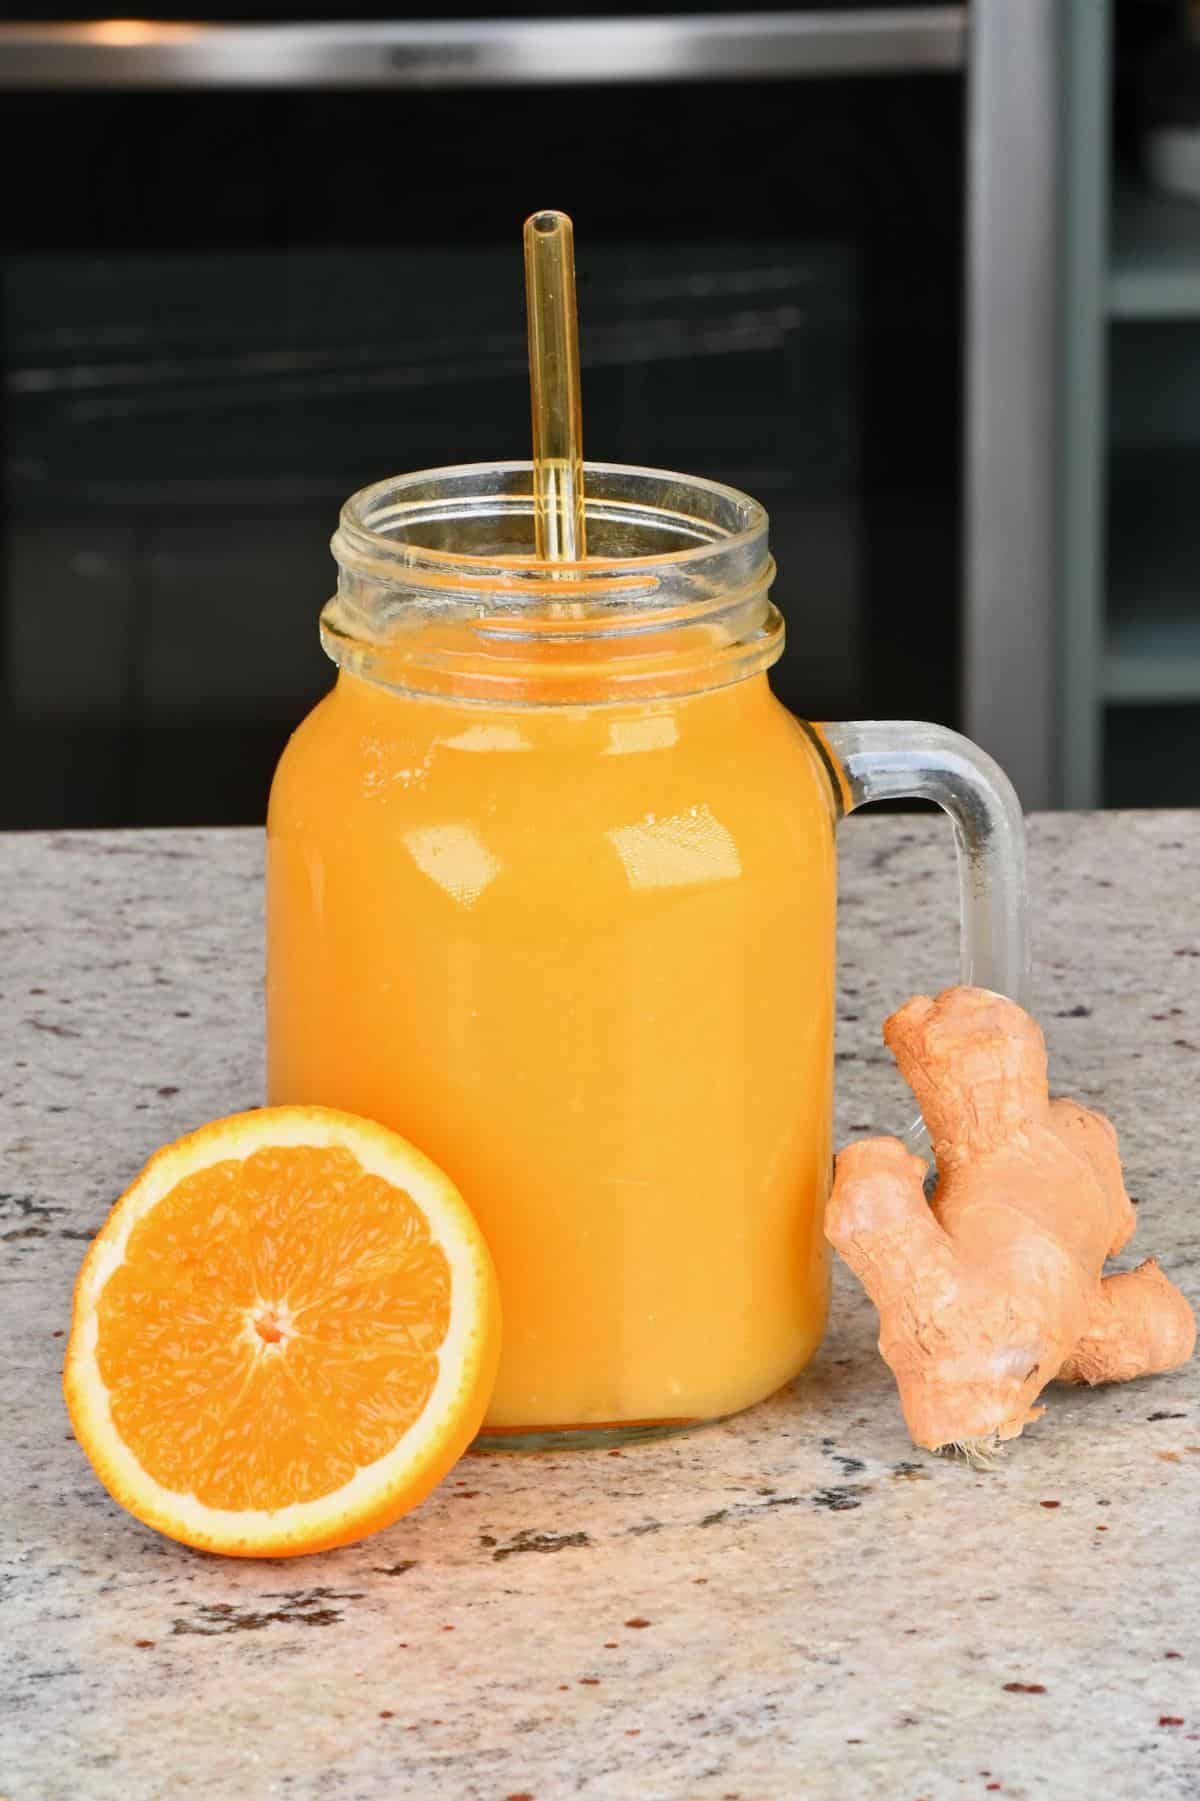 How To Make Orange Juice With A Blender At Home 